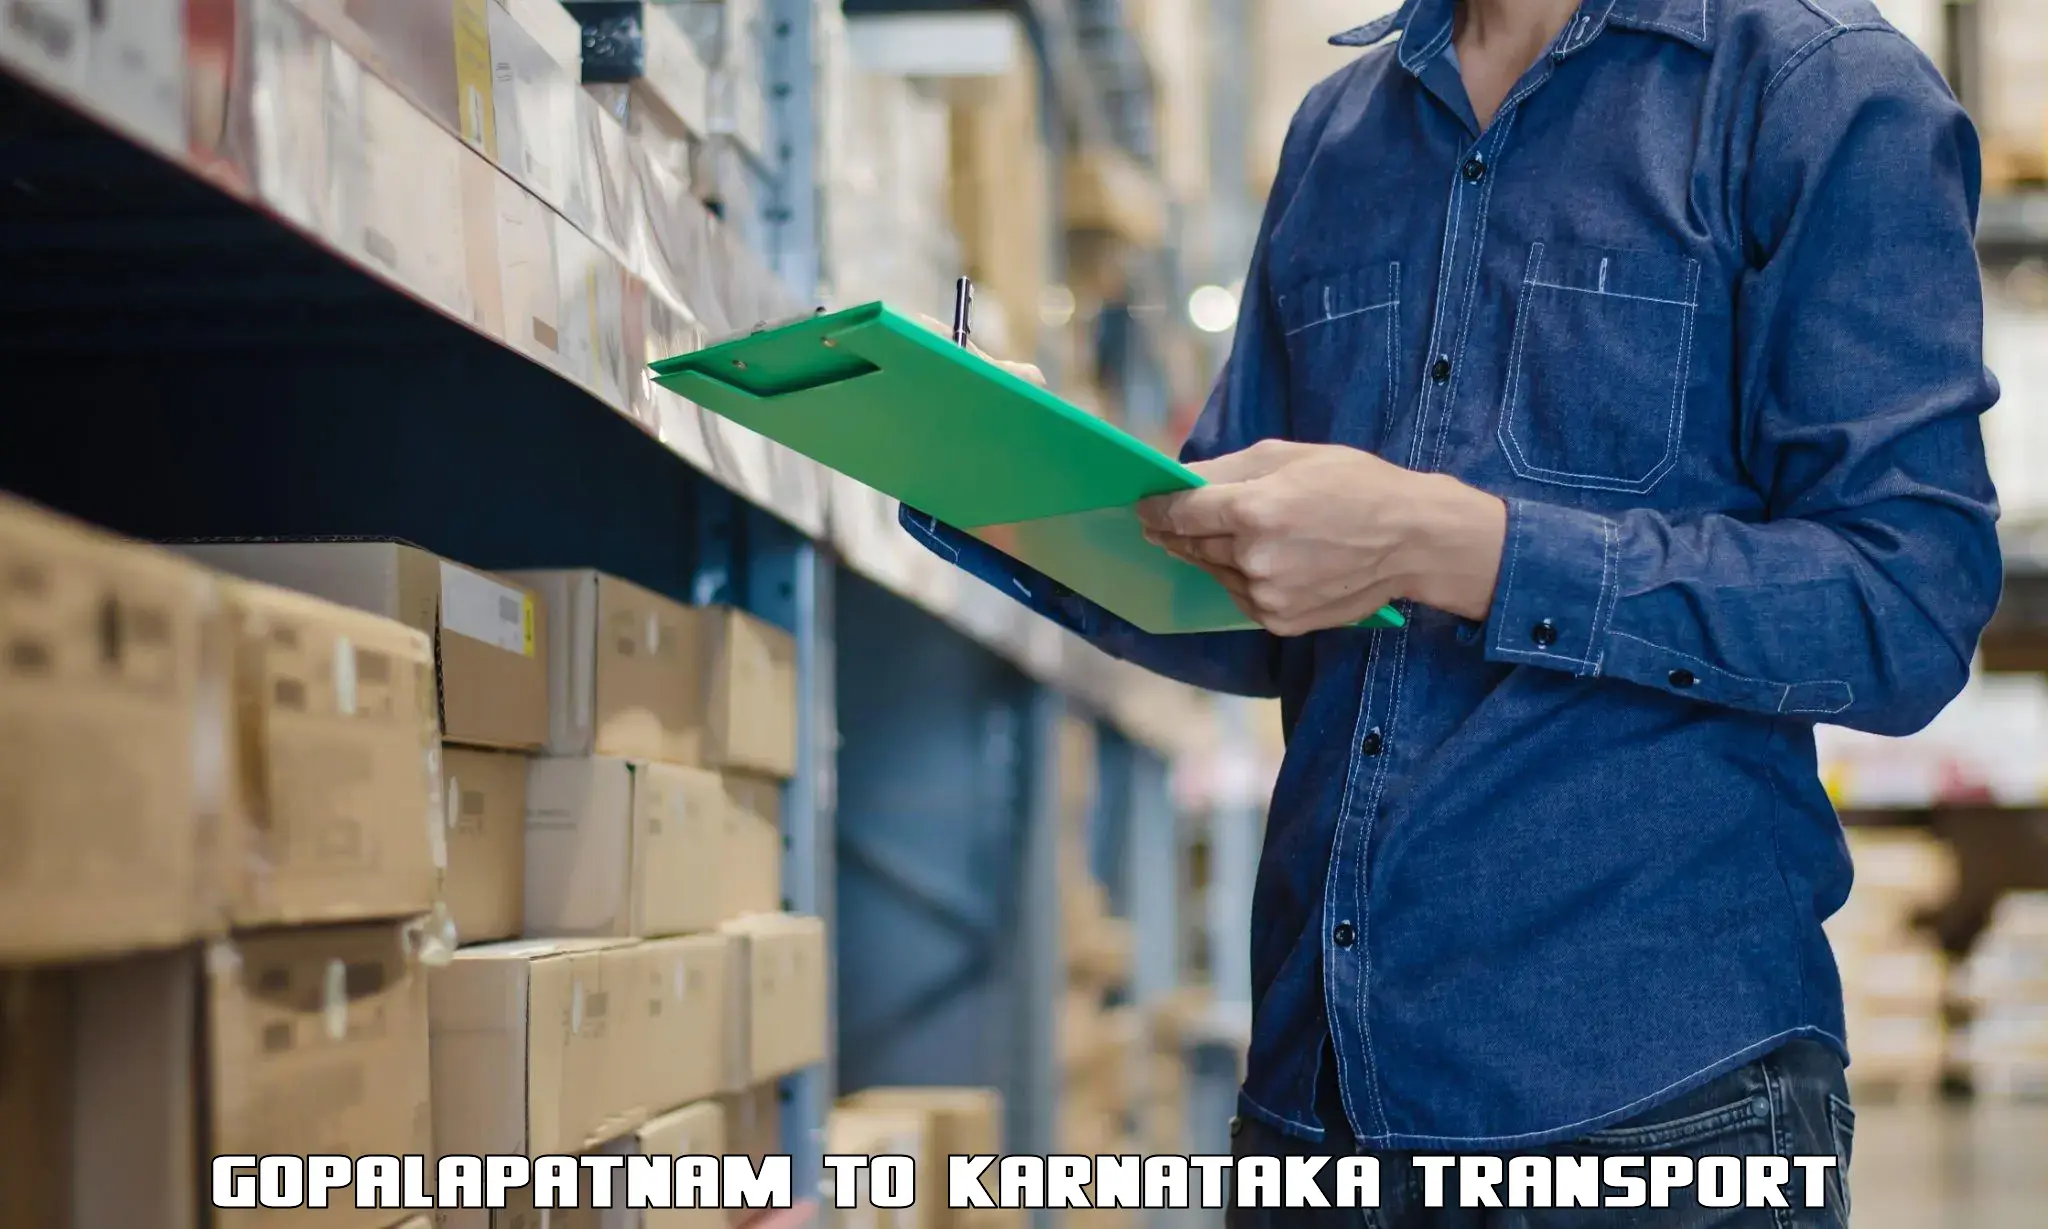 Two wheeler parcel service Gopalapatnam to Kollegal